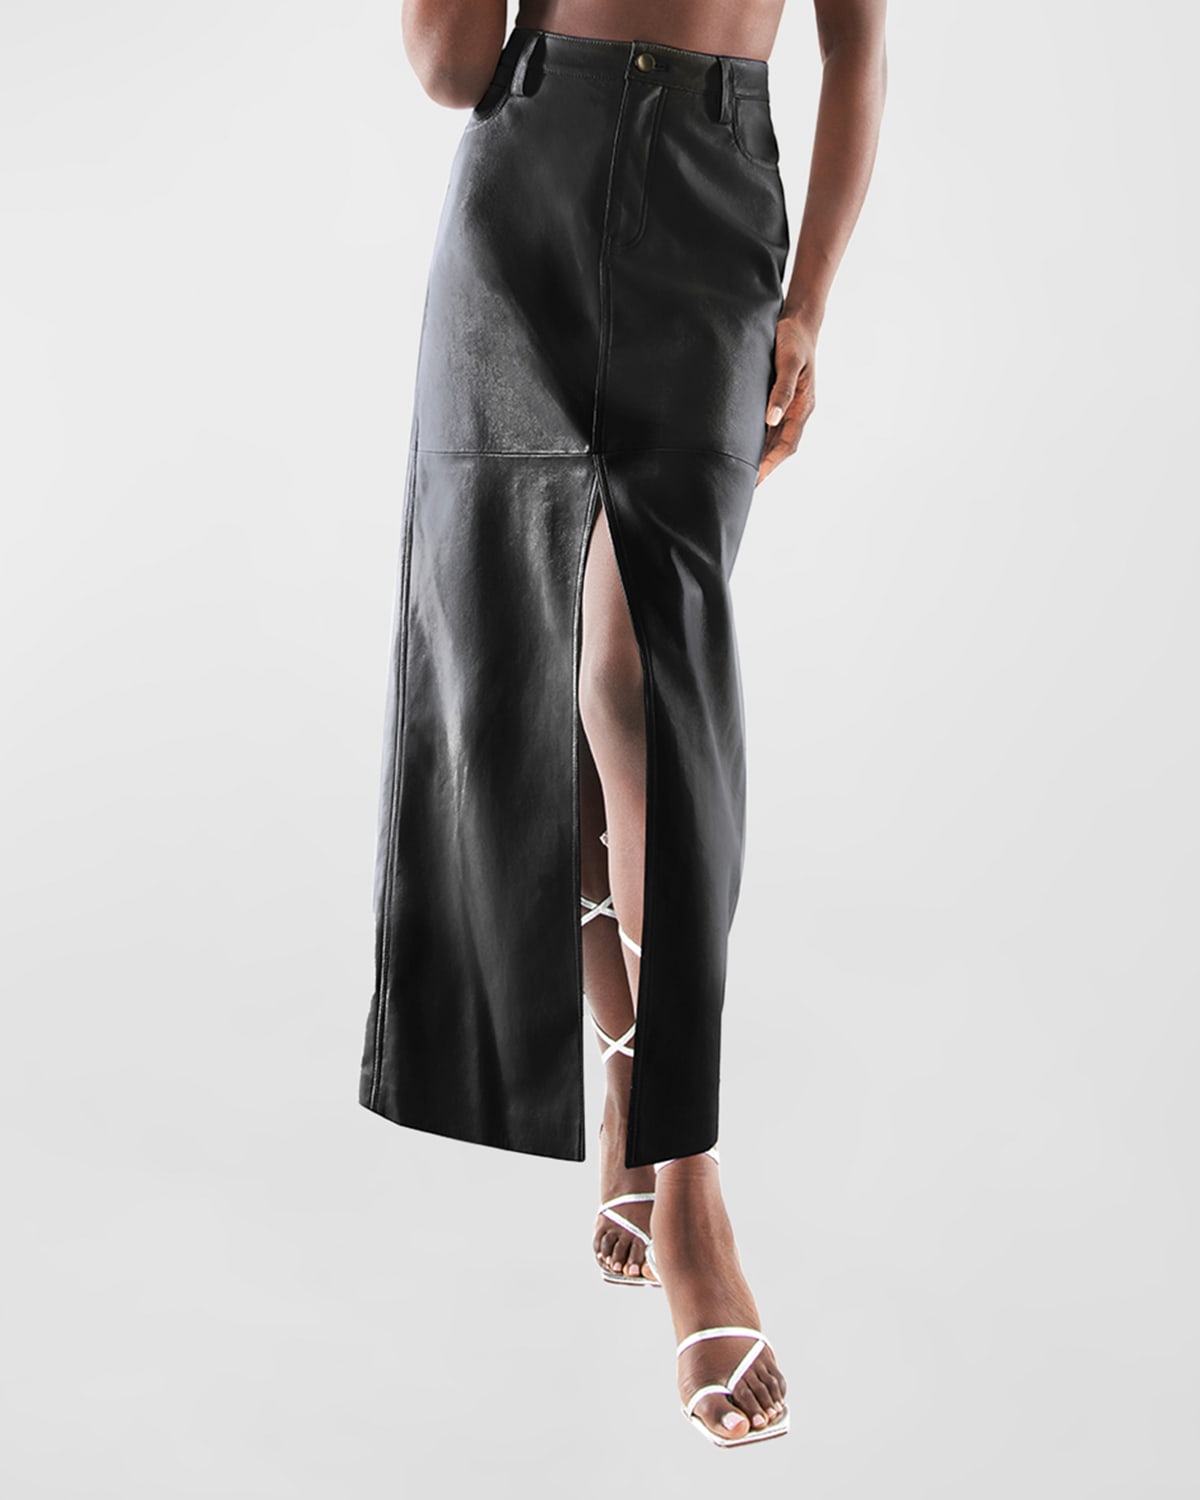 Imogen Recycled Leather Maxi Skirt